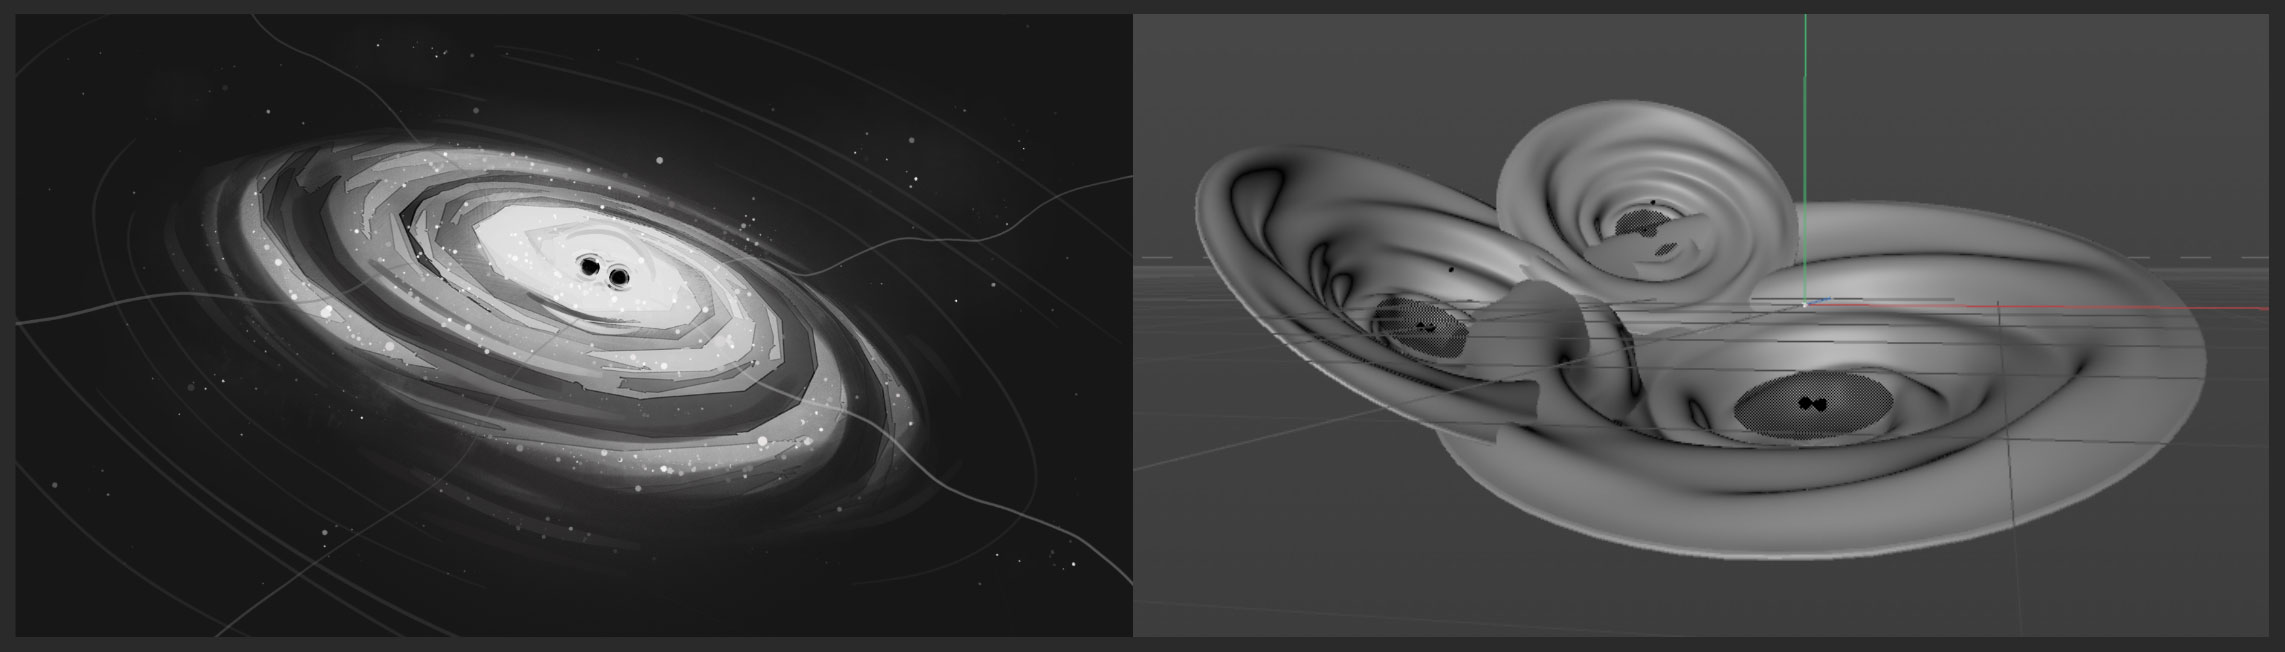 2D and 3D sketches of gravitational waves